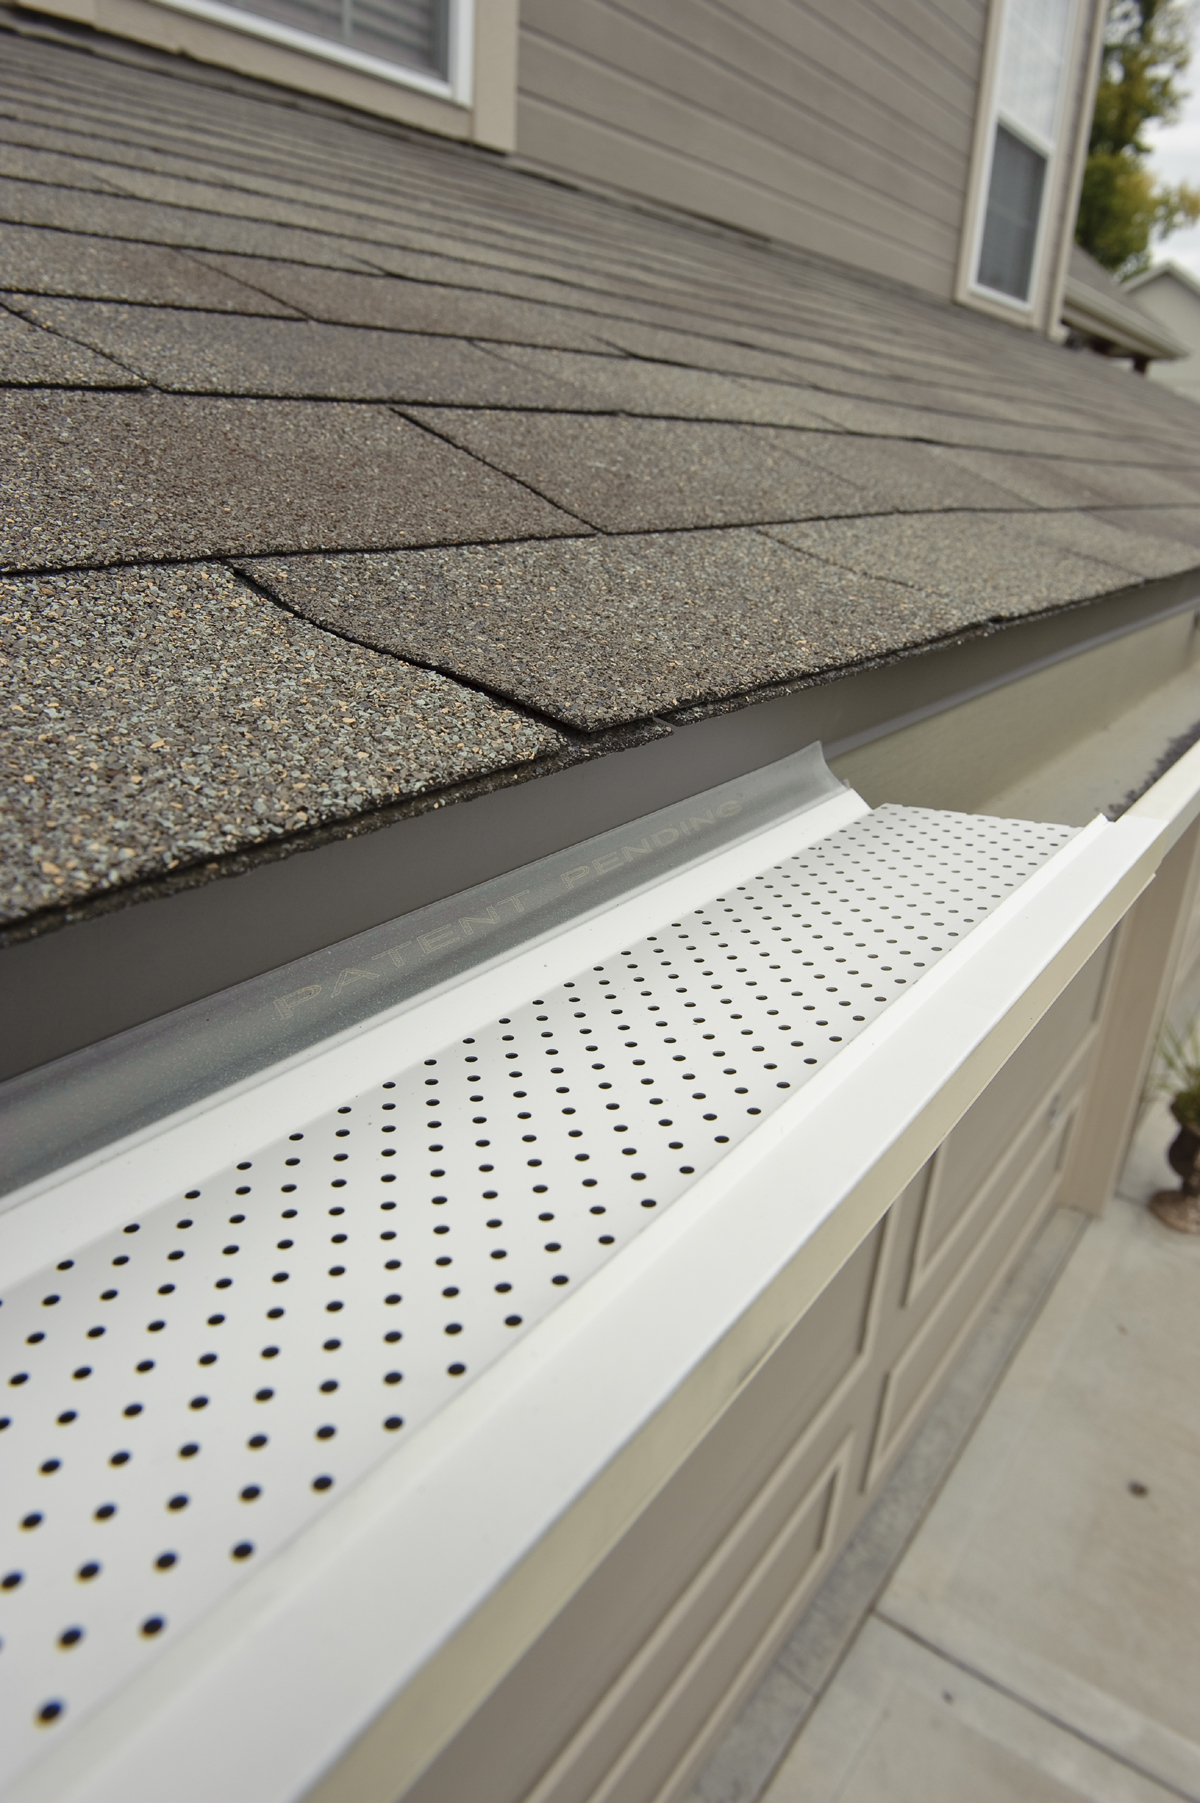 New Durabuilt Gutter Protection by Ply Gem Offers Consumers Affordable